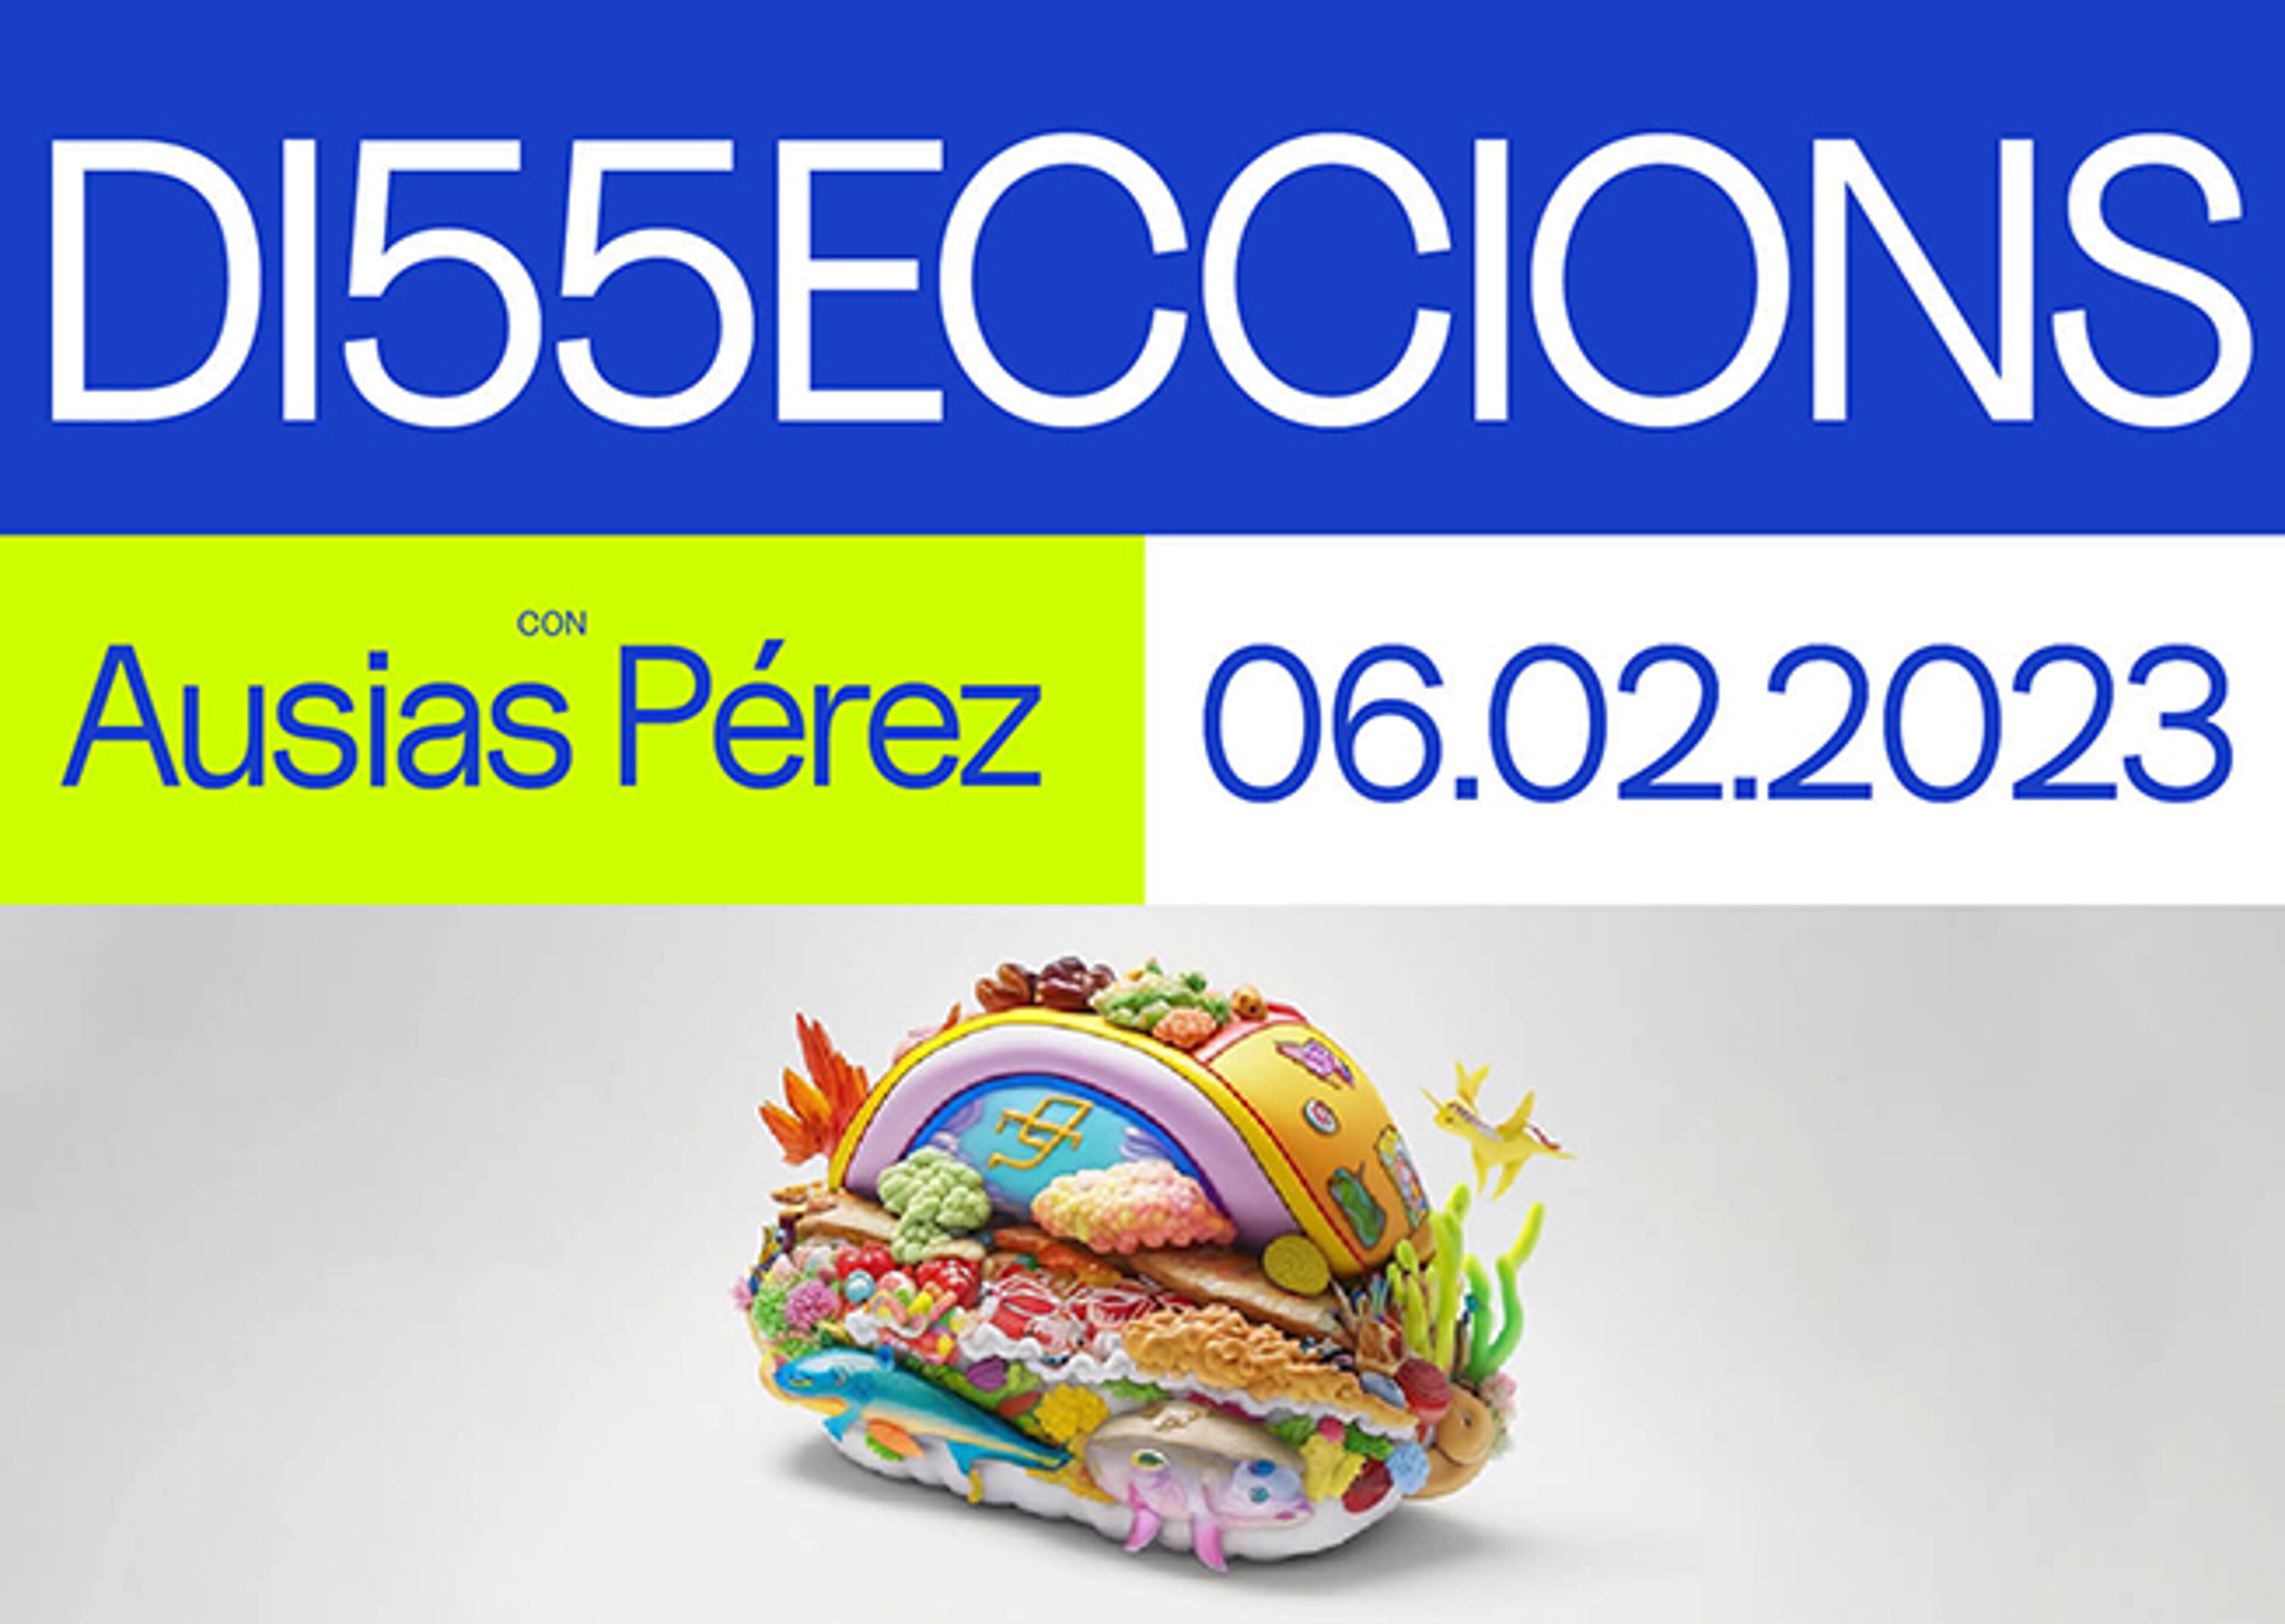 A colorful poster announcing "DI55ECCIONS" with "Ausias Pérez" and date "06.02.2023", featuring a vibrant, decorated egg sculpture.